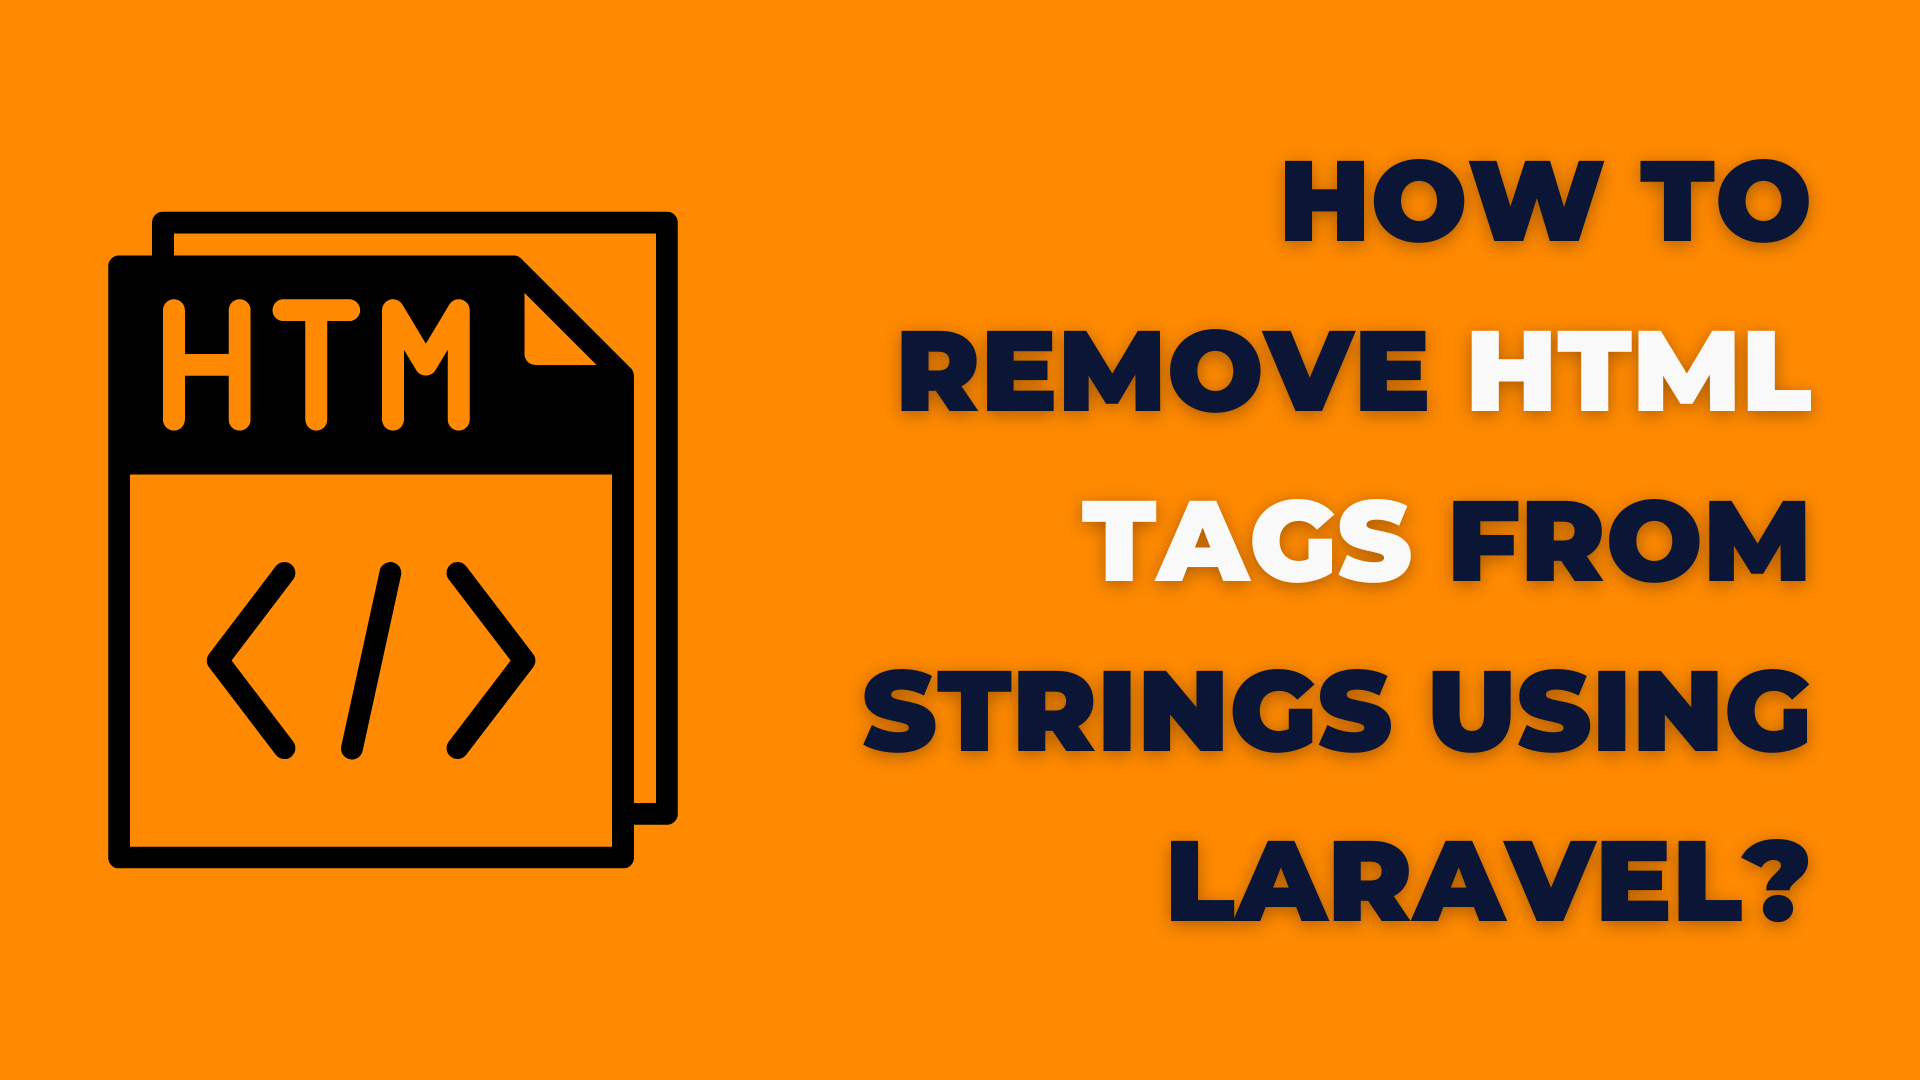 How to remove HTML Tags from strings using Laravel?